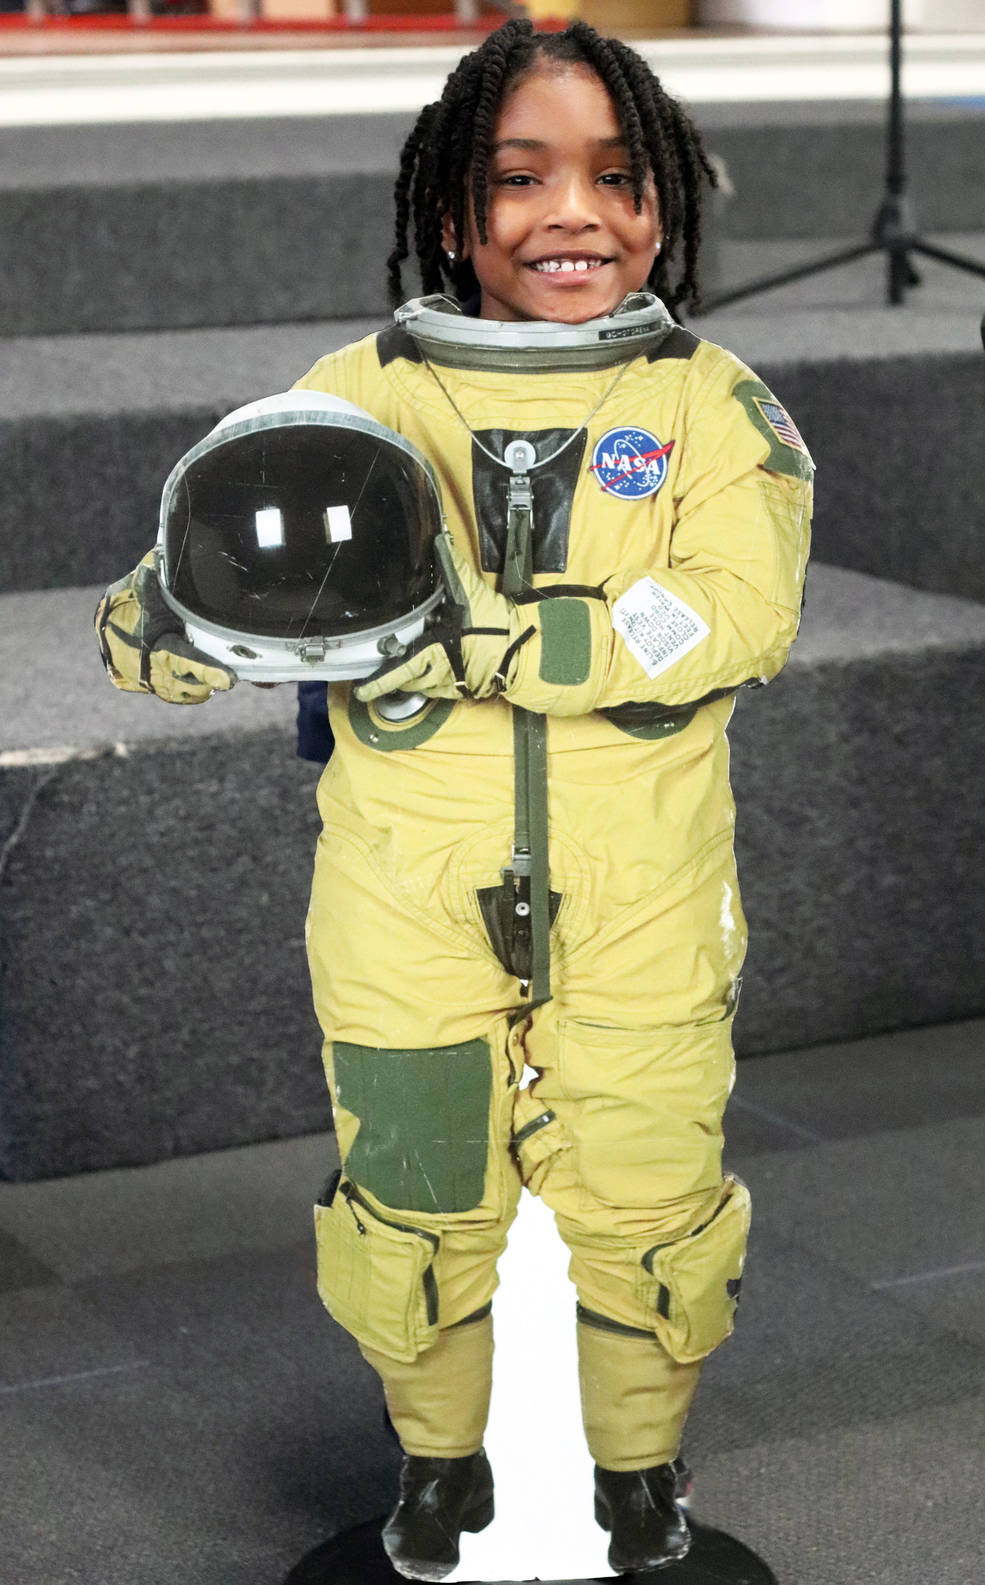 A student poses as an astronaut during an outreach event